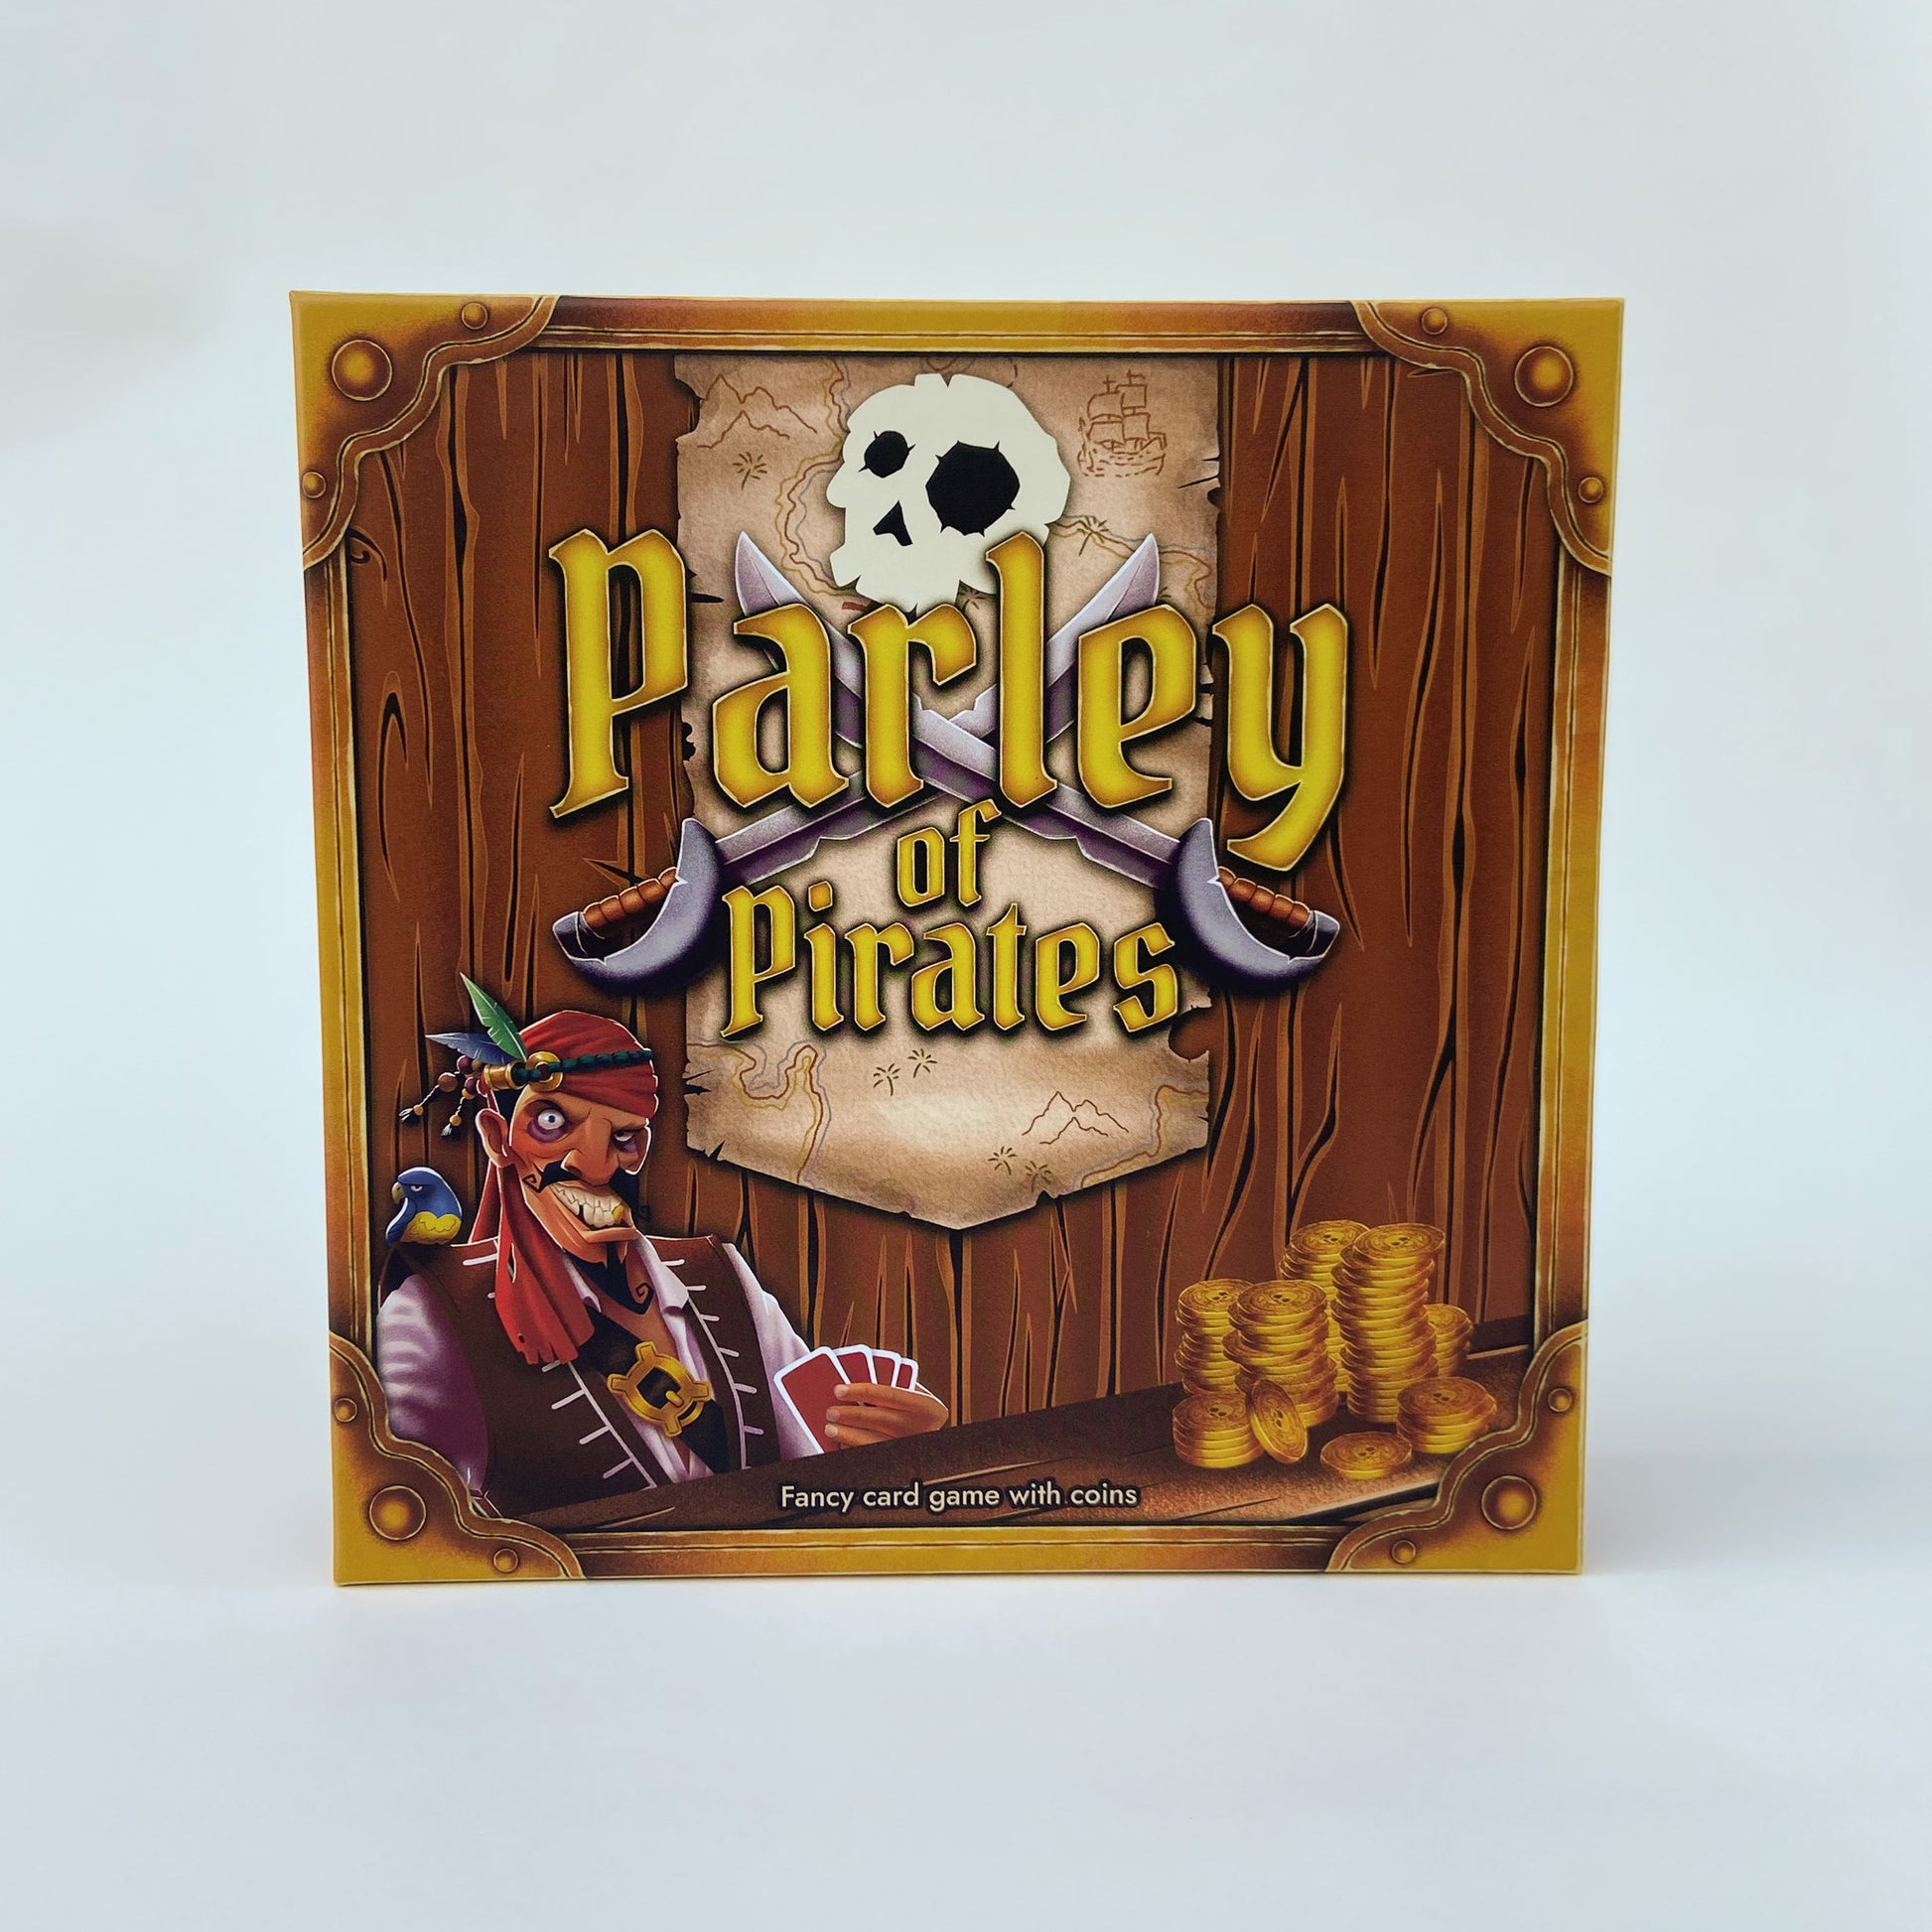 Very Good Games: Pirate Cards - play free online